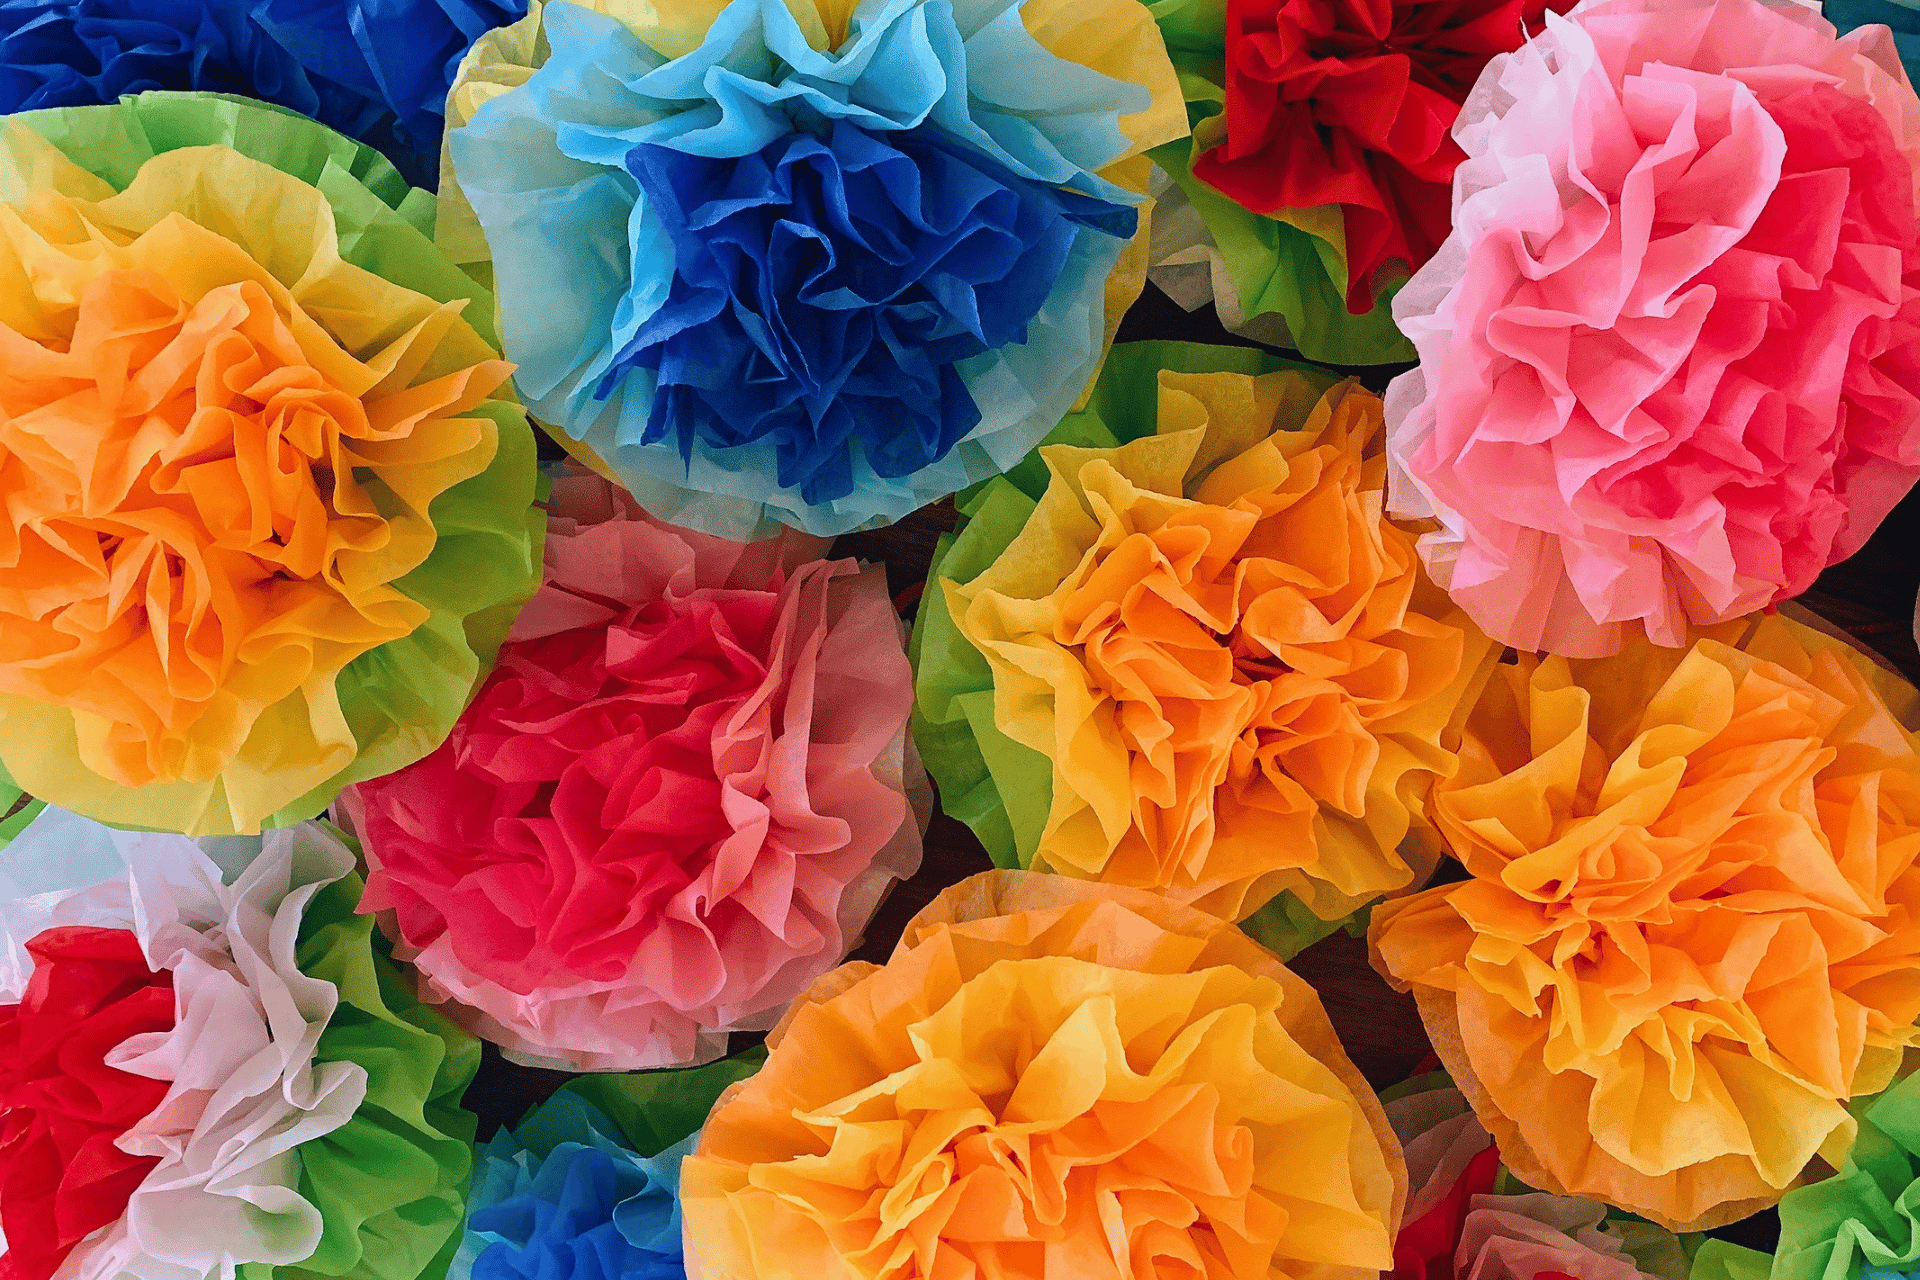 Close-up of vibrant, multicolored tissue paper flowers clustered together, featuring shades of yellow, red, pink, blue, green, and white.